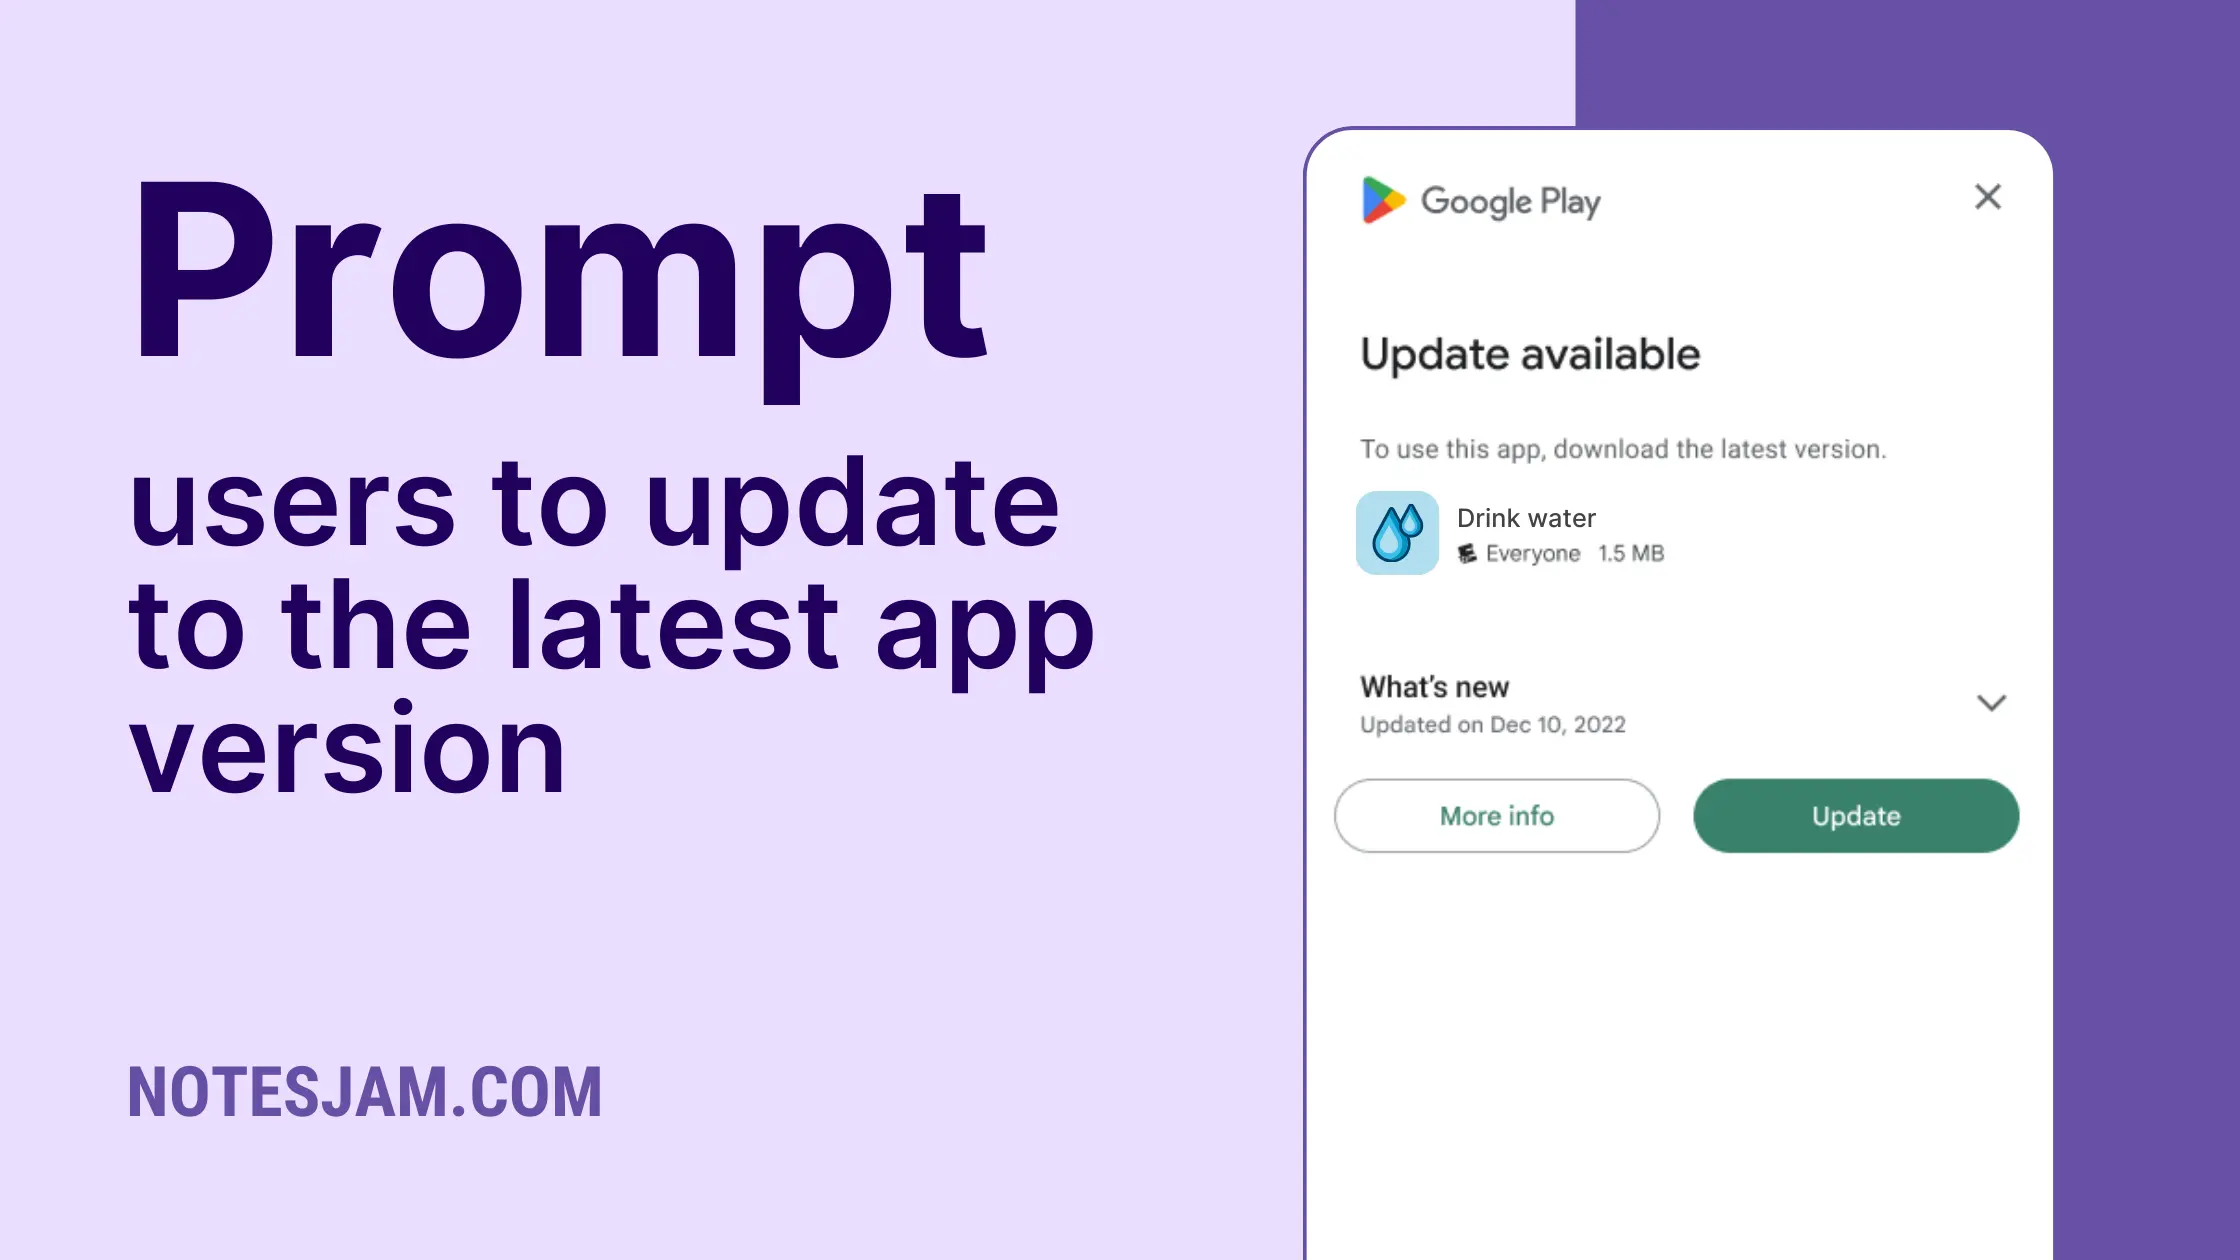 Boost User Engagement: Google Play’s New Update Prompt Tools